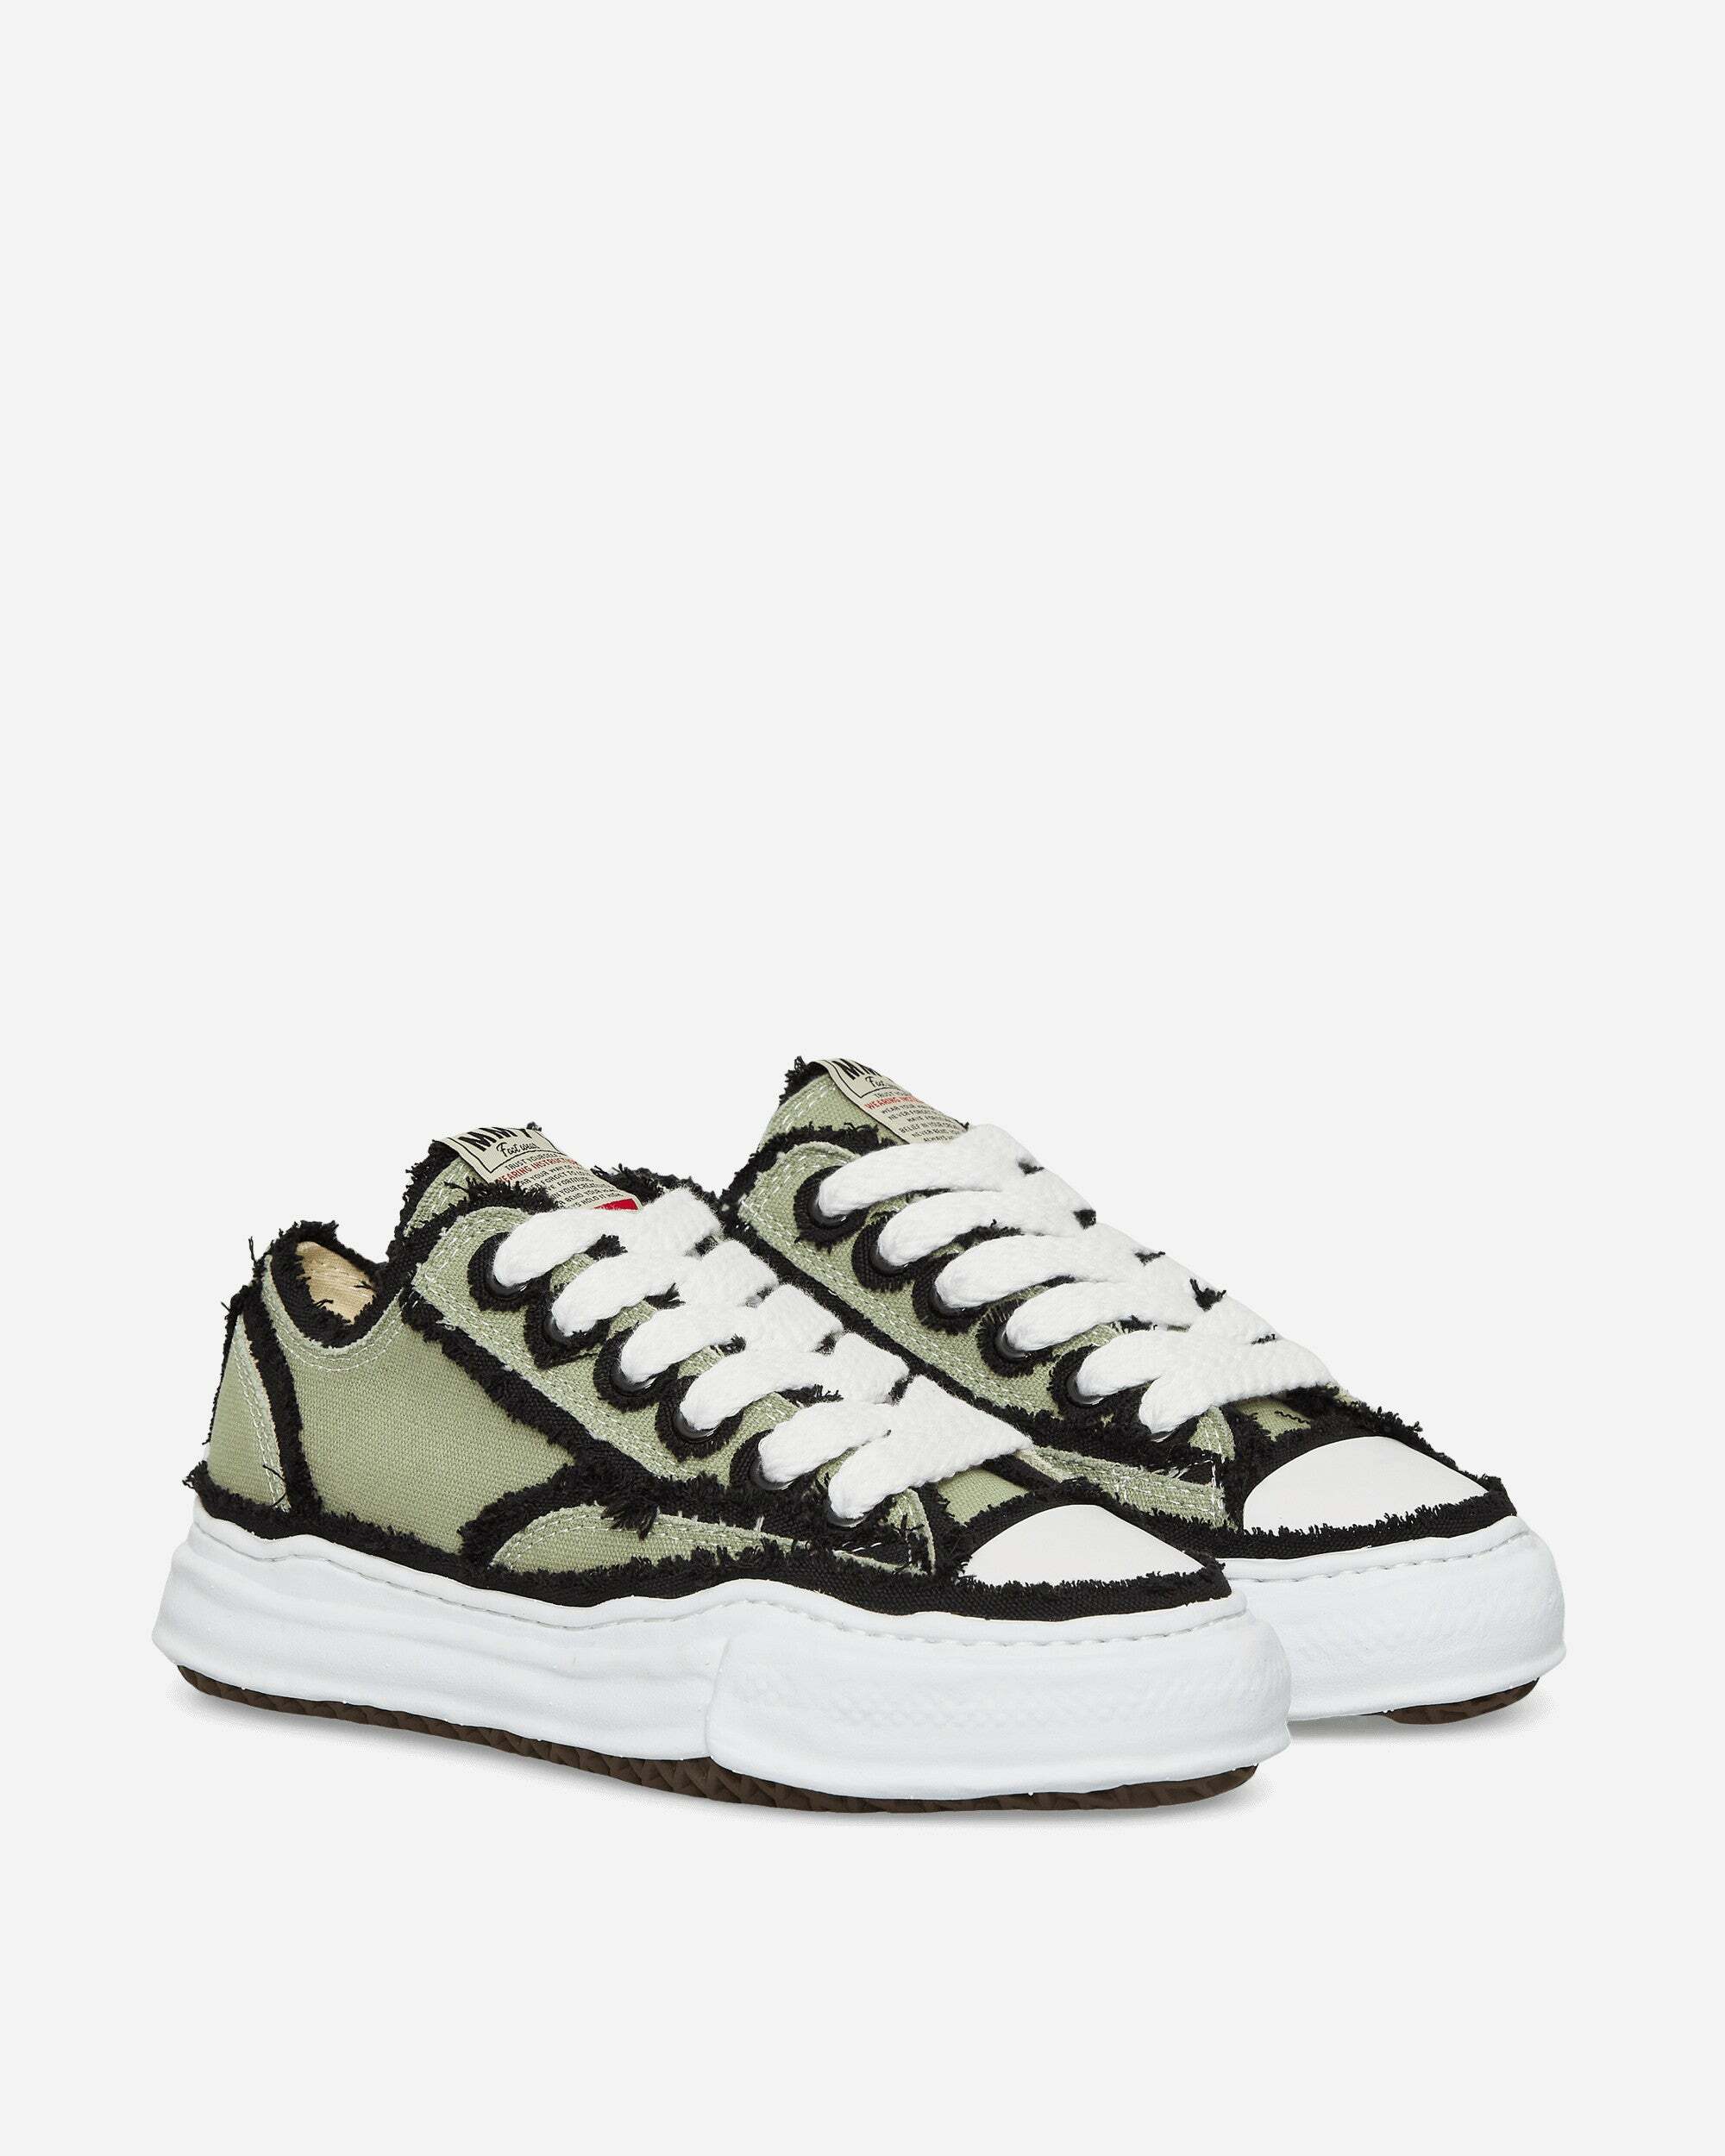 Peterson Og Sole Overhanging Canvas Low Sneakers Maison MIHARA YASUHIRO